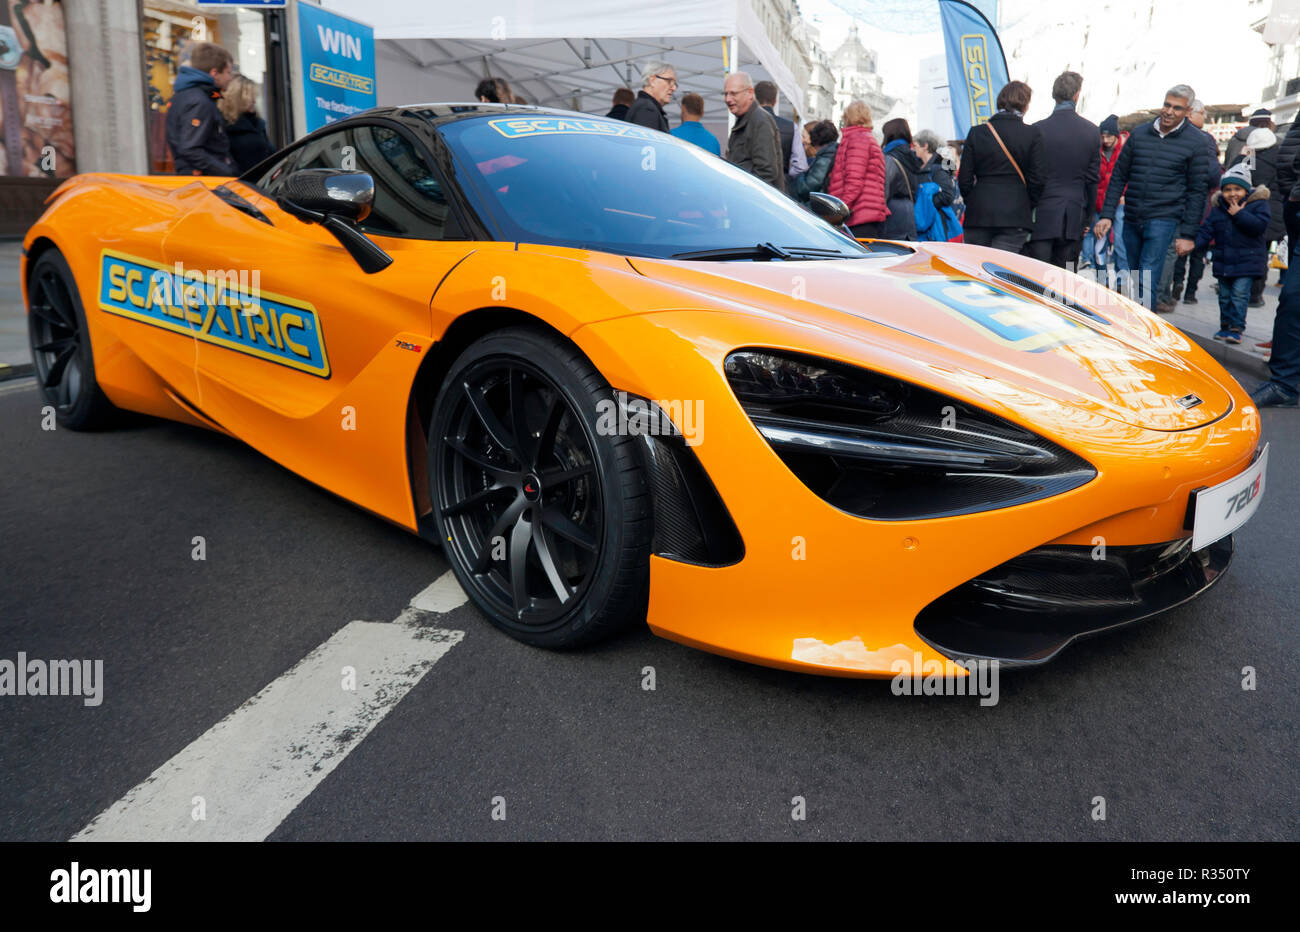 Three-quarters front view of a yellow McLaren 720S, at the Scalextric stand, at the 2018 Regents Street Motor Show. Stock Photo